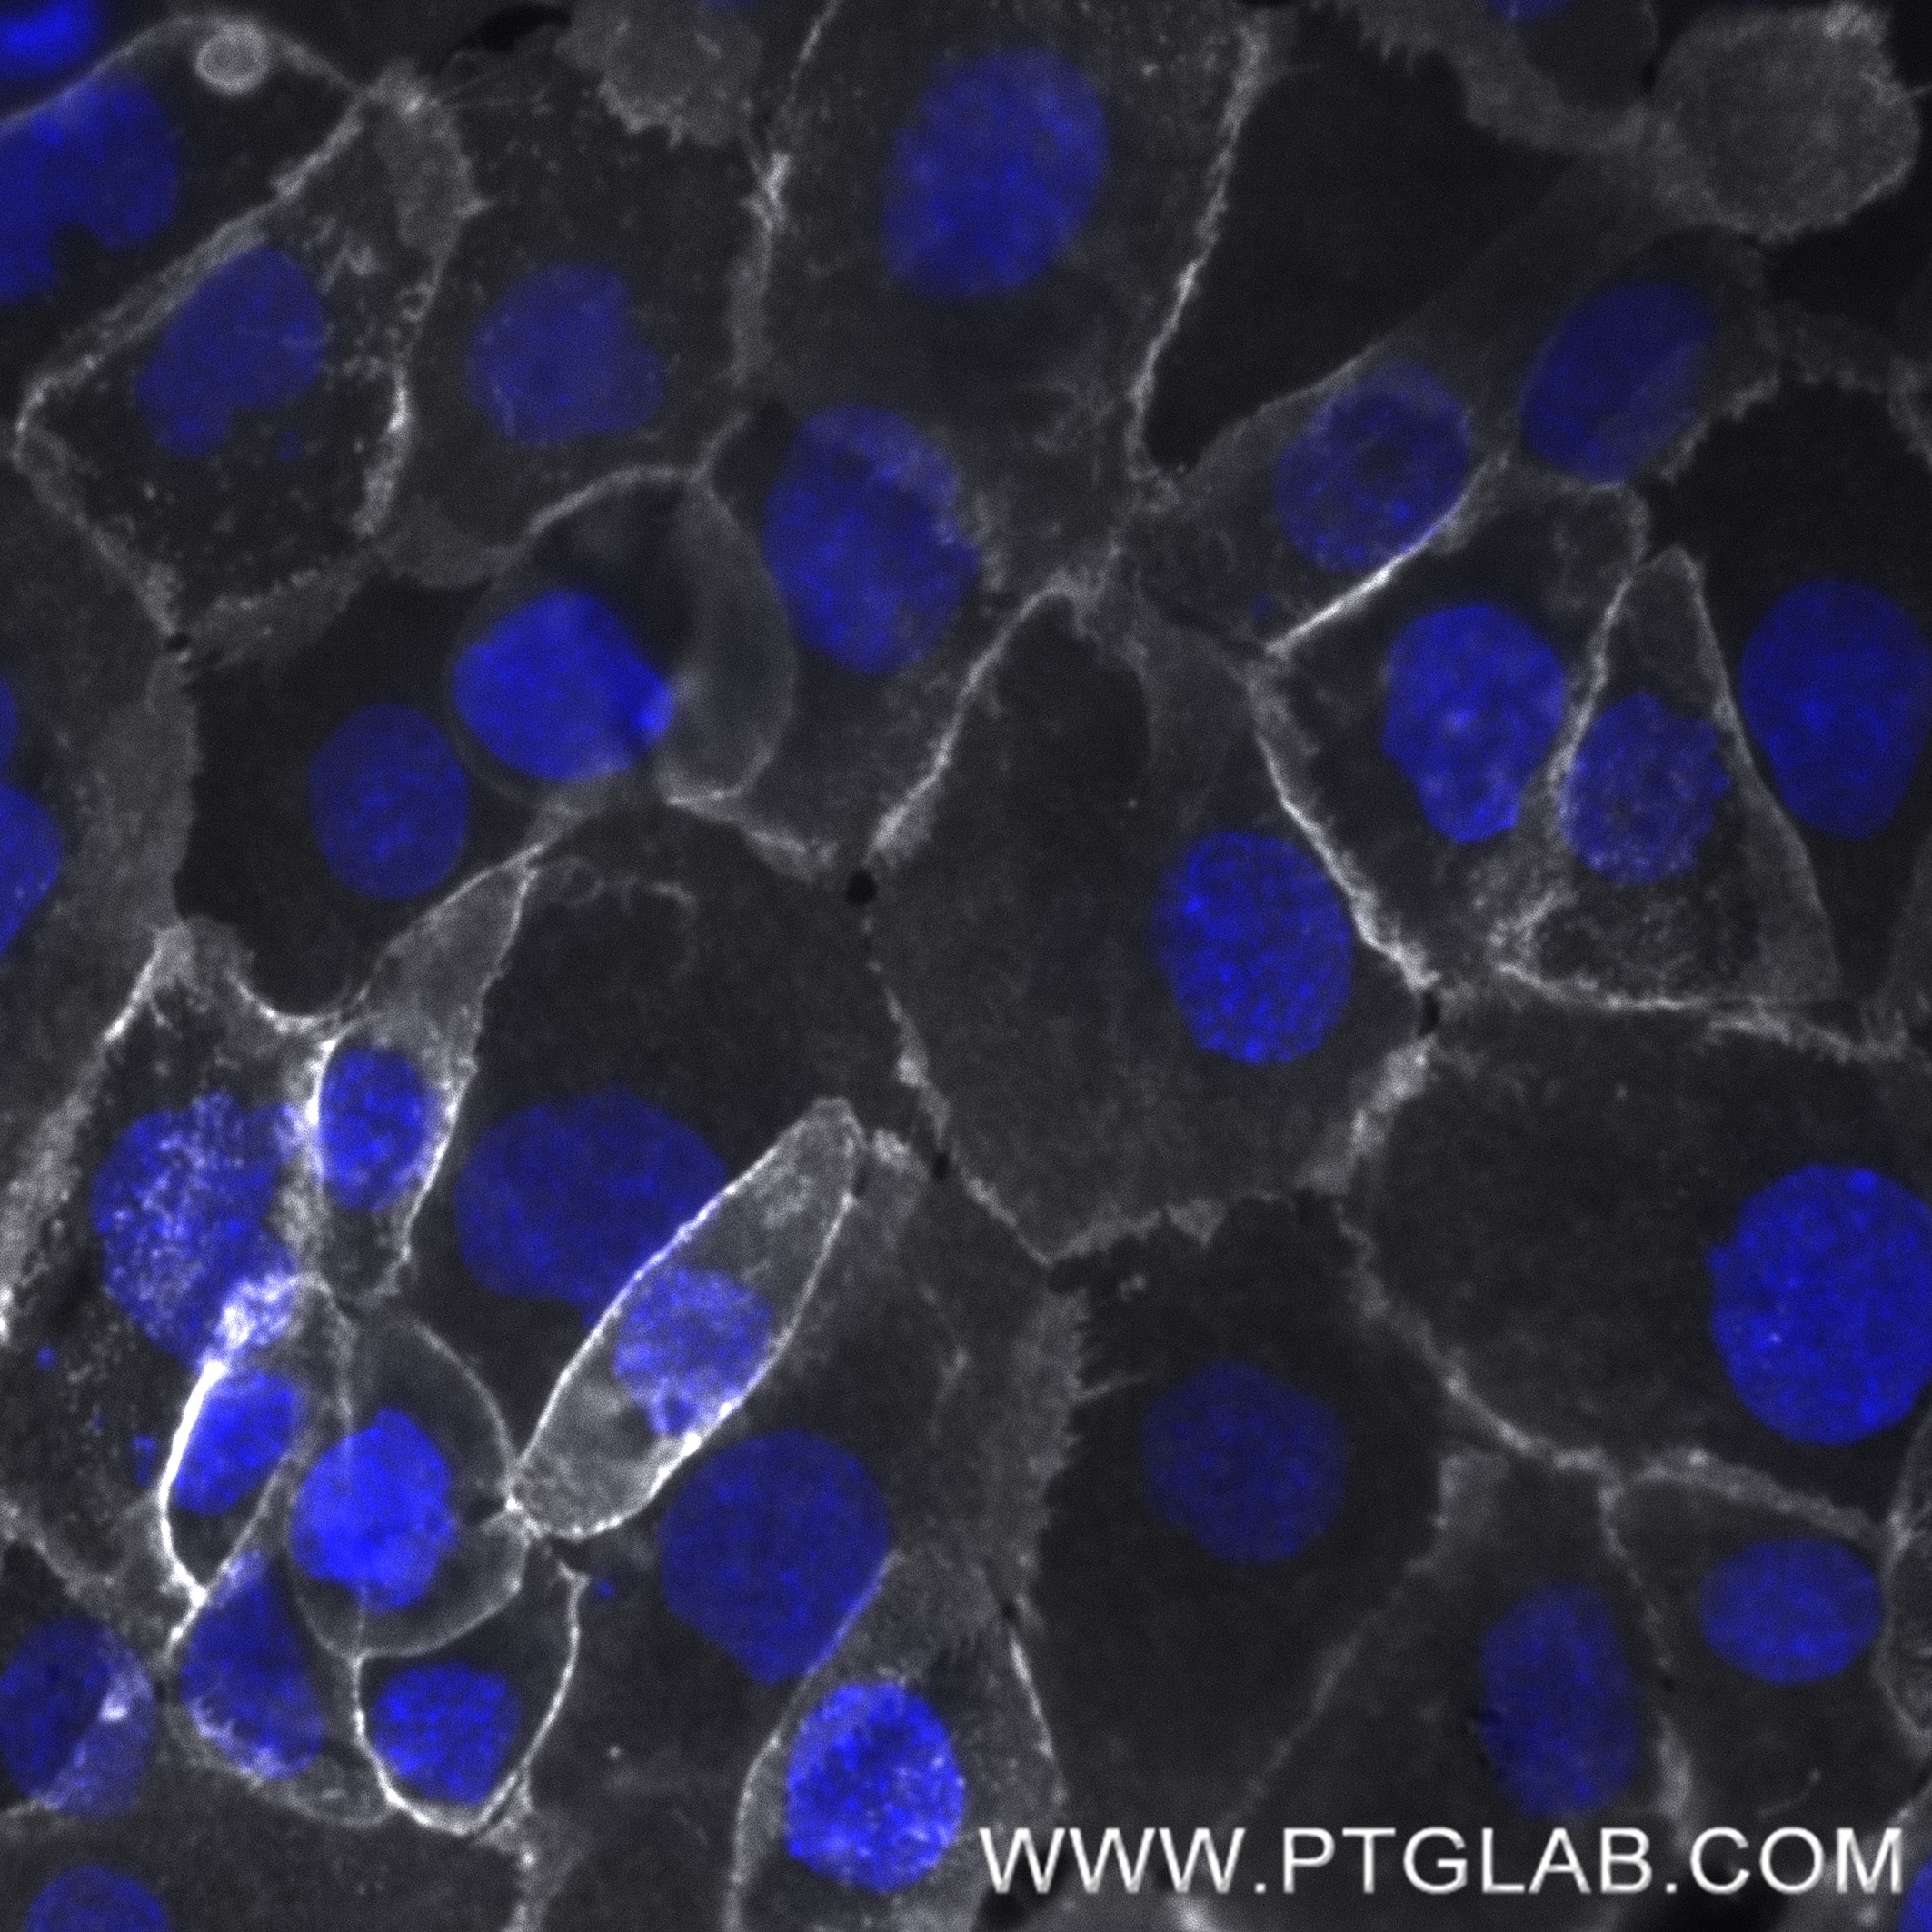 Live A431 cells were incubated with anti-human EGFR (Cetuximab biosimilar) followed by Nano-Secondary® alpaca anti-human IgG, recombinant VHH, CoraLite® Plus 750 [CTK0117] (shuGCL750-2, gray). Cells were fixed and nuclei were stained with DAPI (blue). Epifluorescence images were acquired with a 40x objective and post-processed.